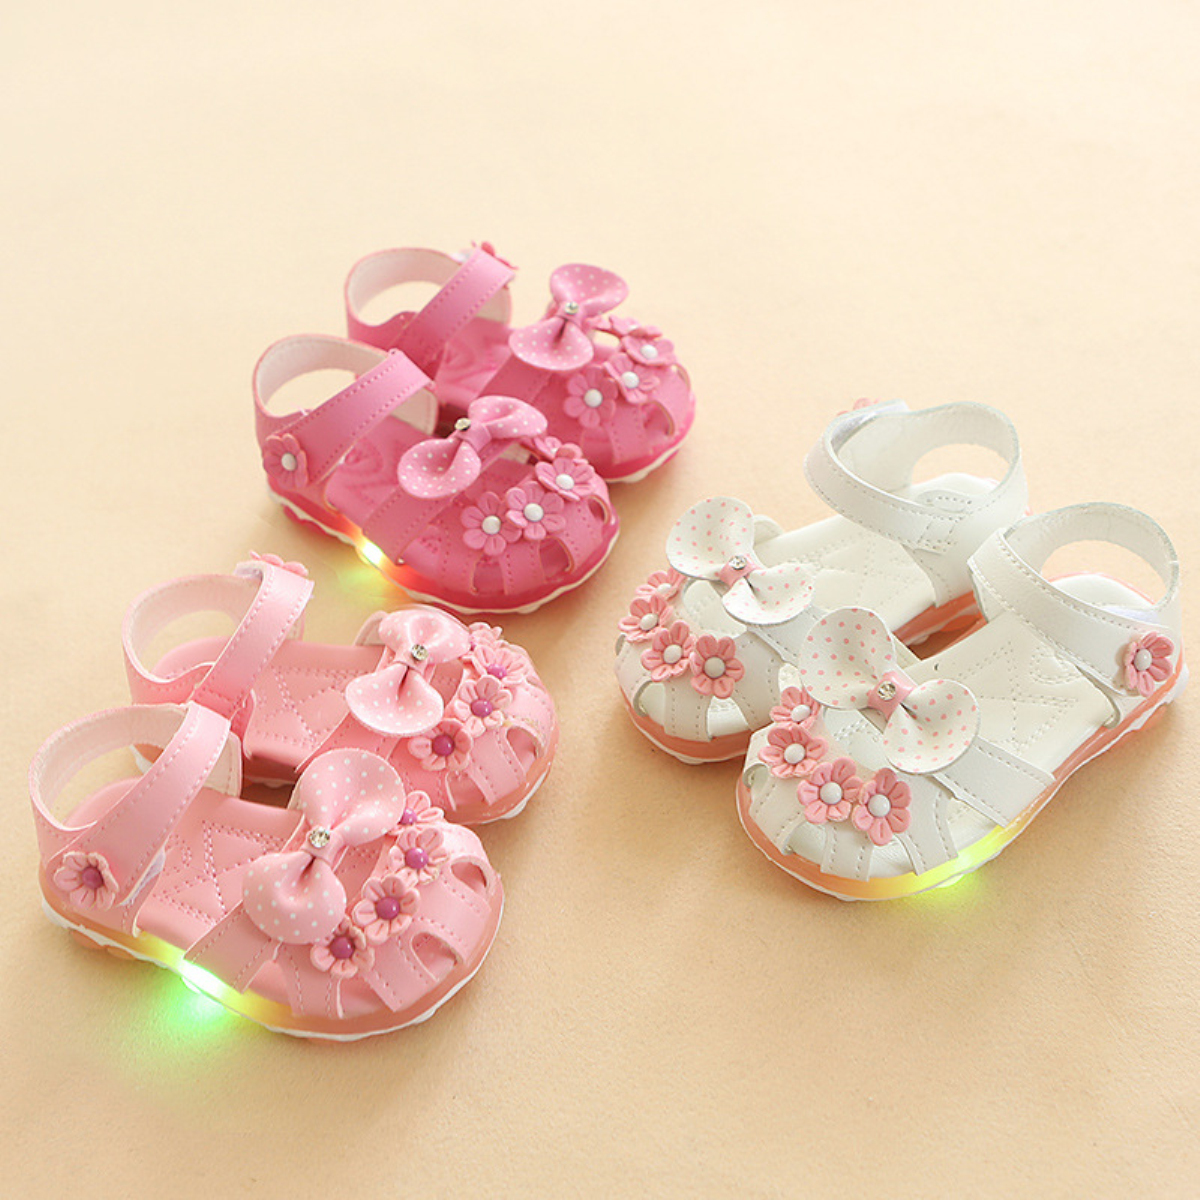 Stunning 3D Flower and Bowknot Applique LED Sandal